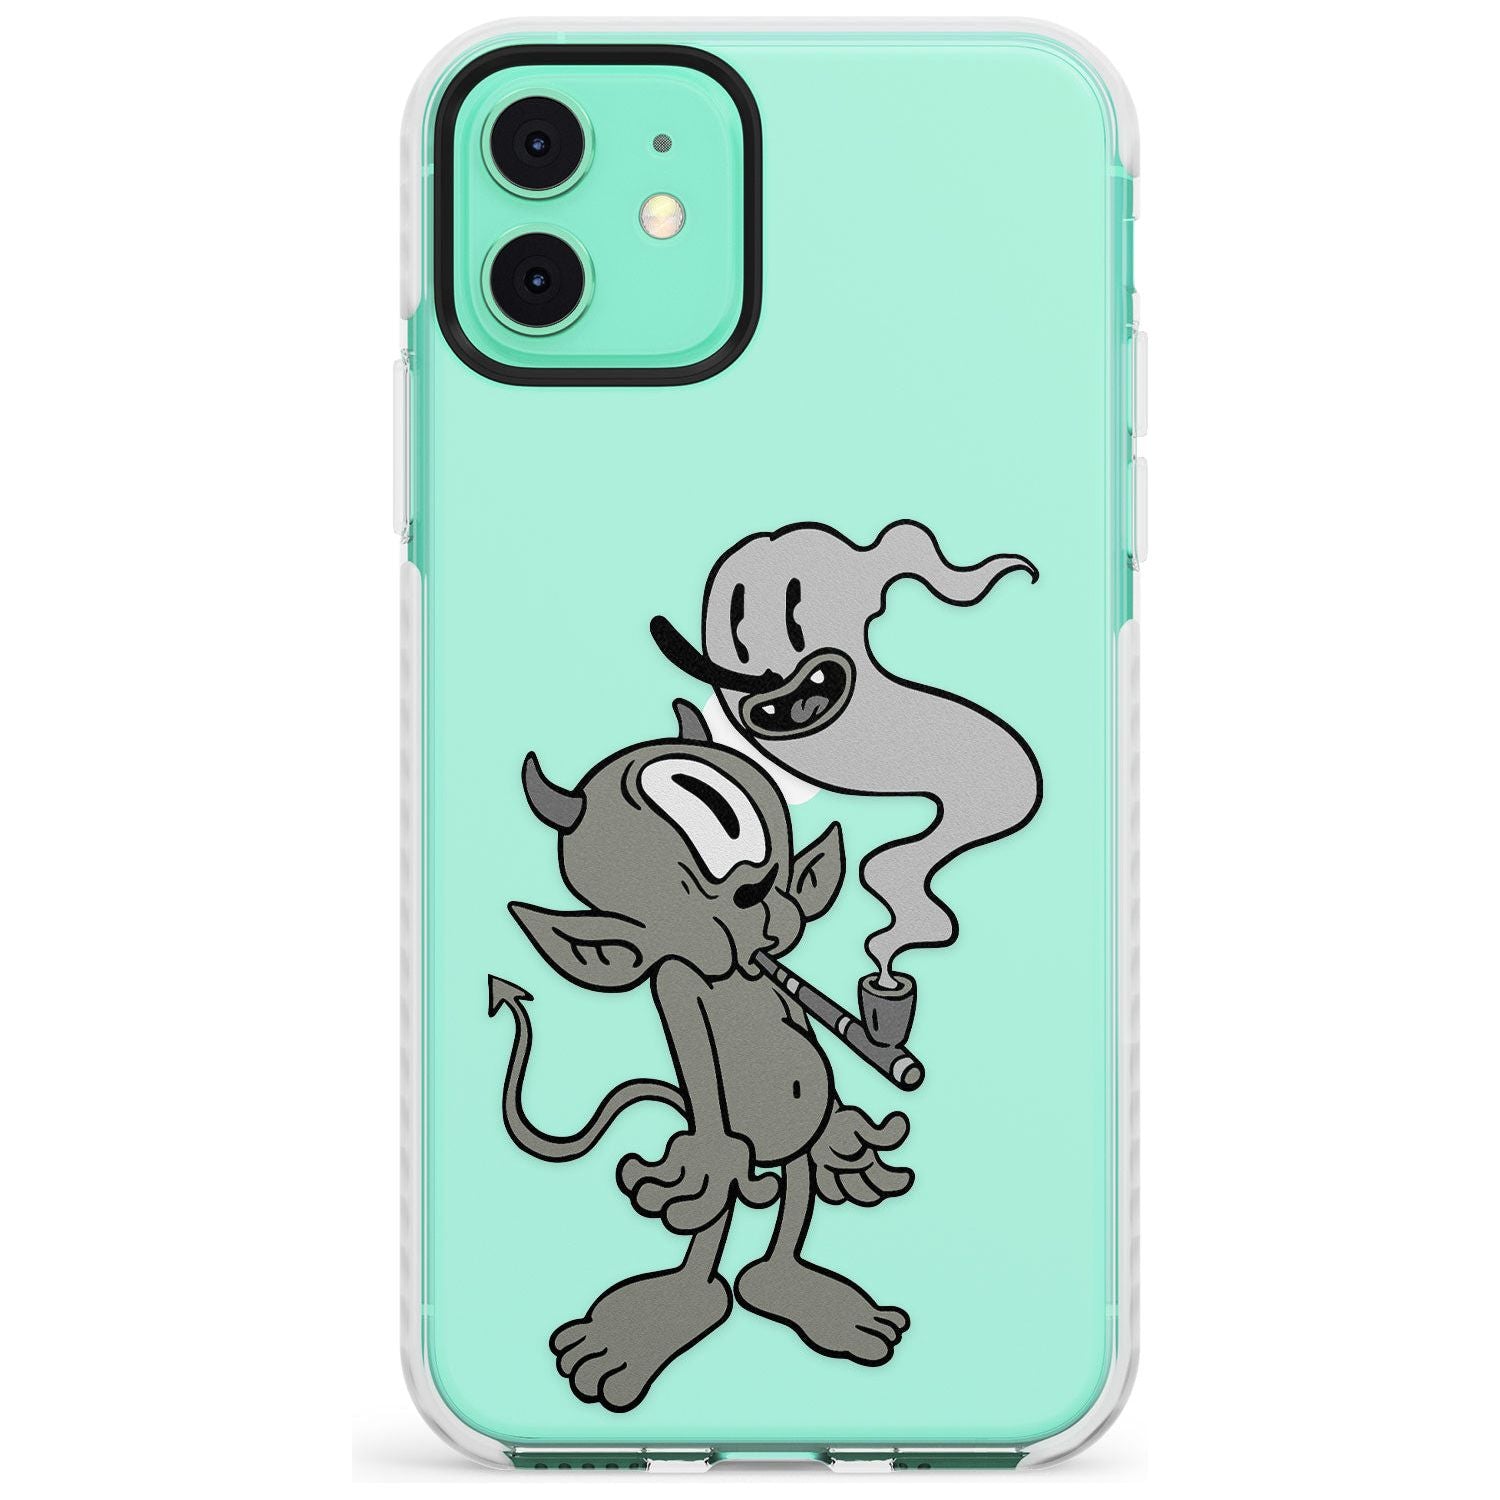 Pipe Goblin Impact Phone Case for iPhone 11